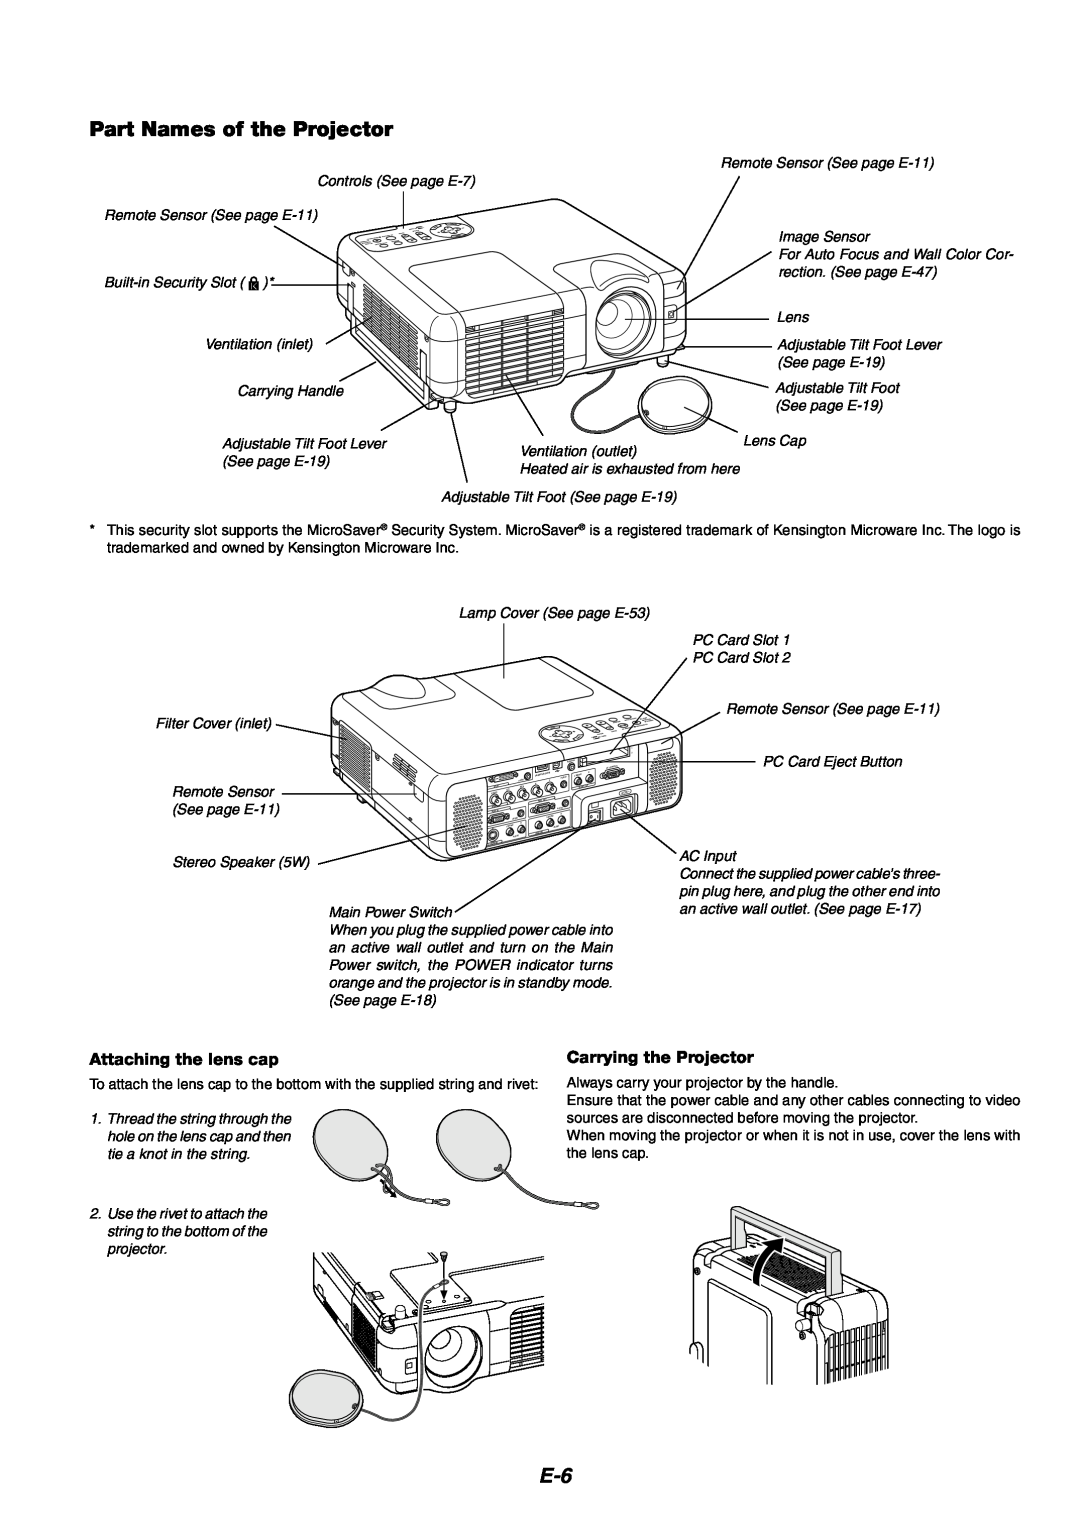 NEC MT1065/MT1060 user manual Part Names of the Projector, Attaching the lens cap, Carrying the Projector 